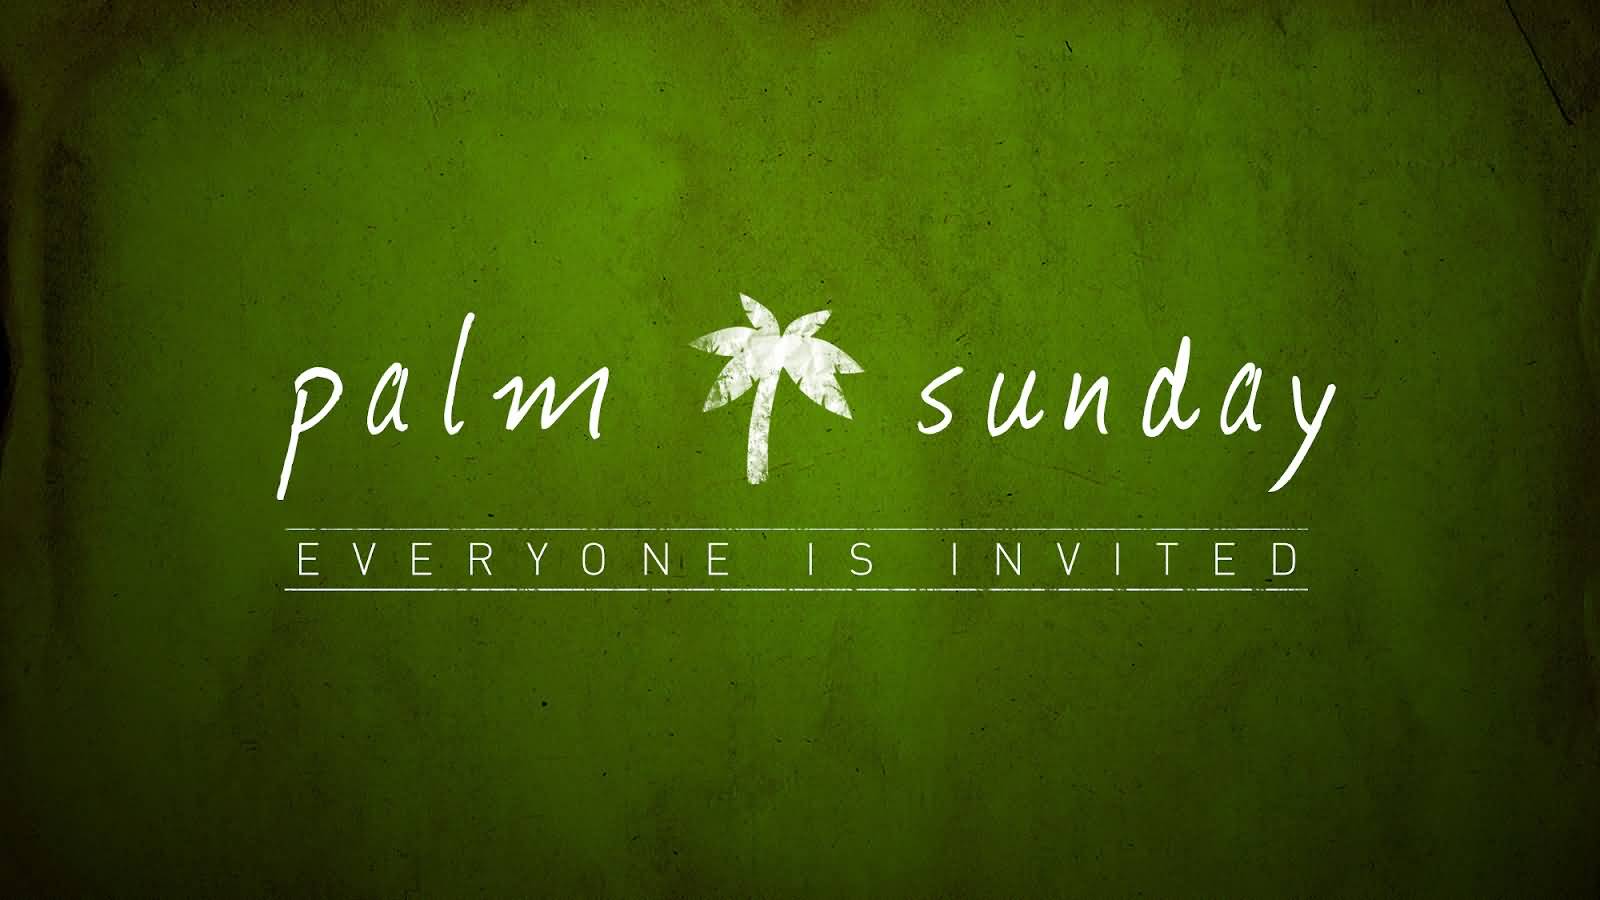 Palm Sunday Everyone Is Invited - Grass - 1600x900 Wallpaper 